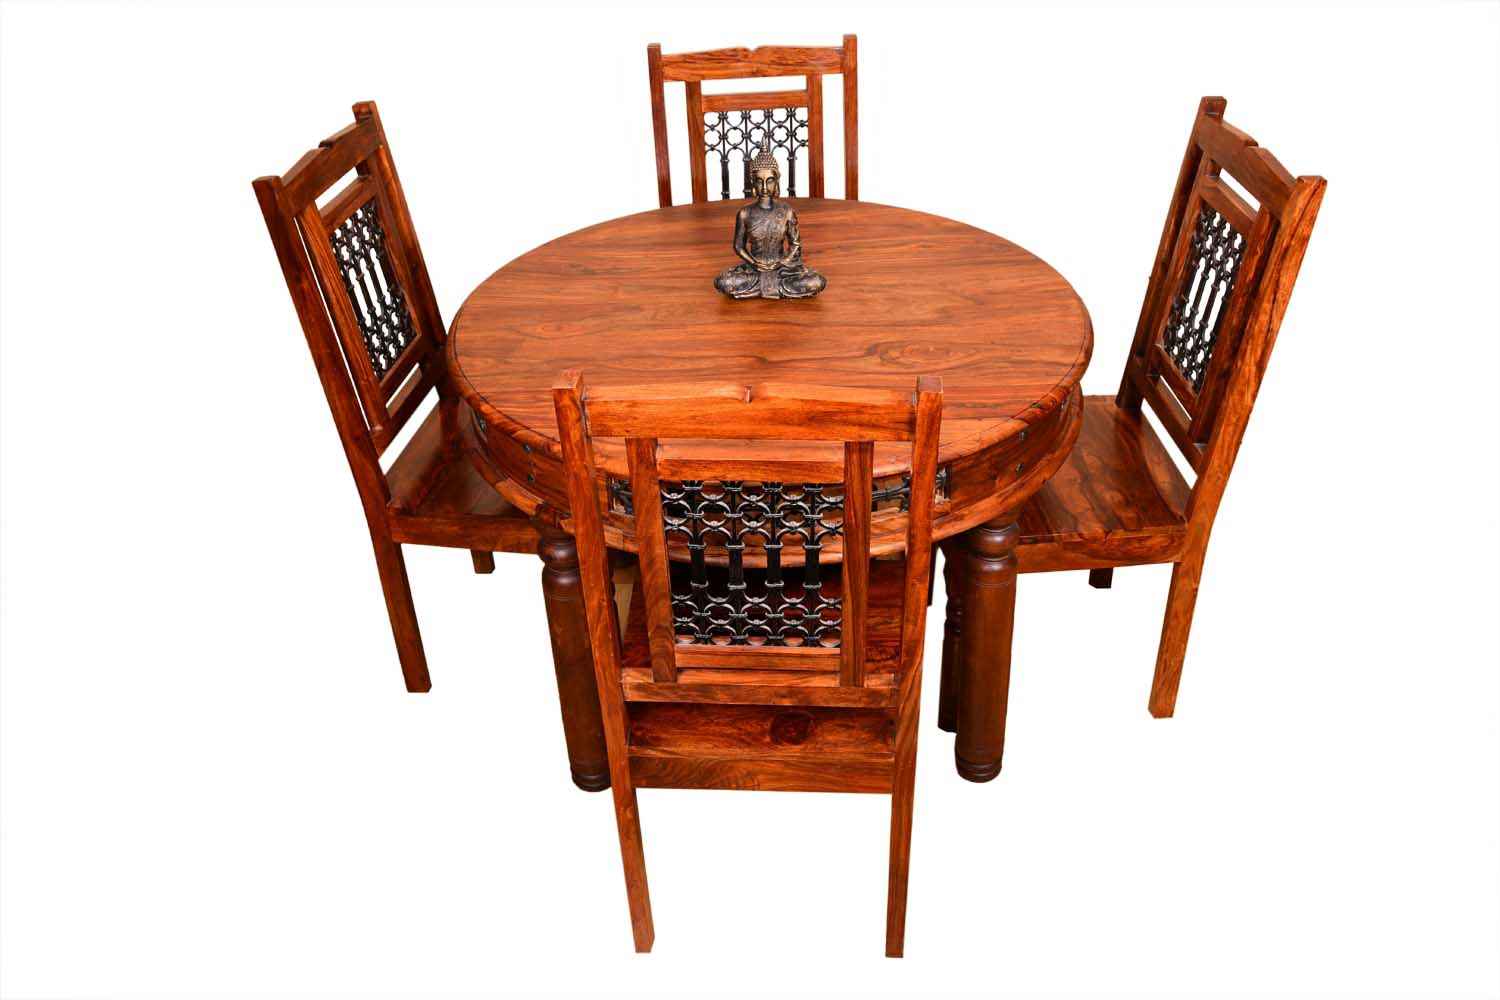 Buy 4 Seater Vintage Round Dining Table Set | Dining Room ...